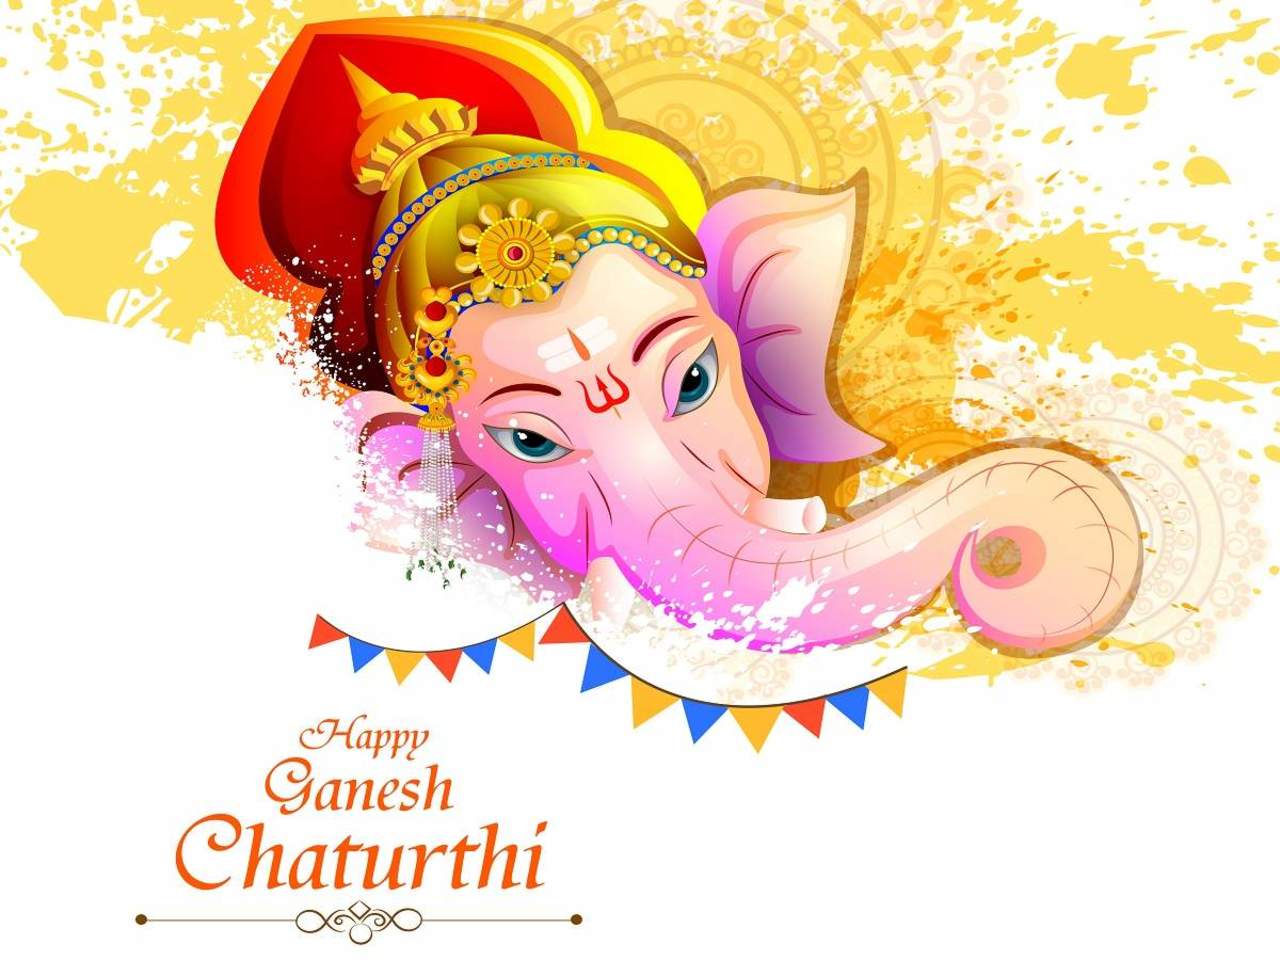 Happy Ganesha Chaturthi 2022: Wishes, Images, Quotes, Status, Messages,  Photos, SMS, Wallpaper, Pics and Greetings | - Times of India